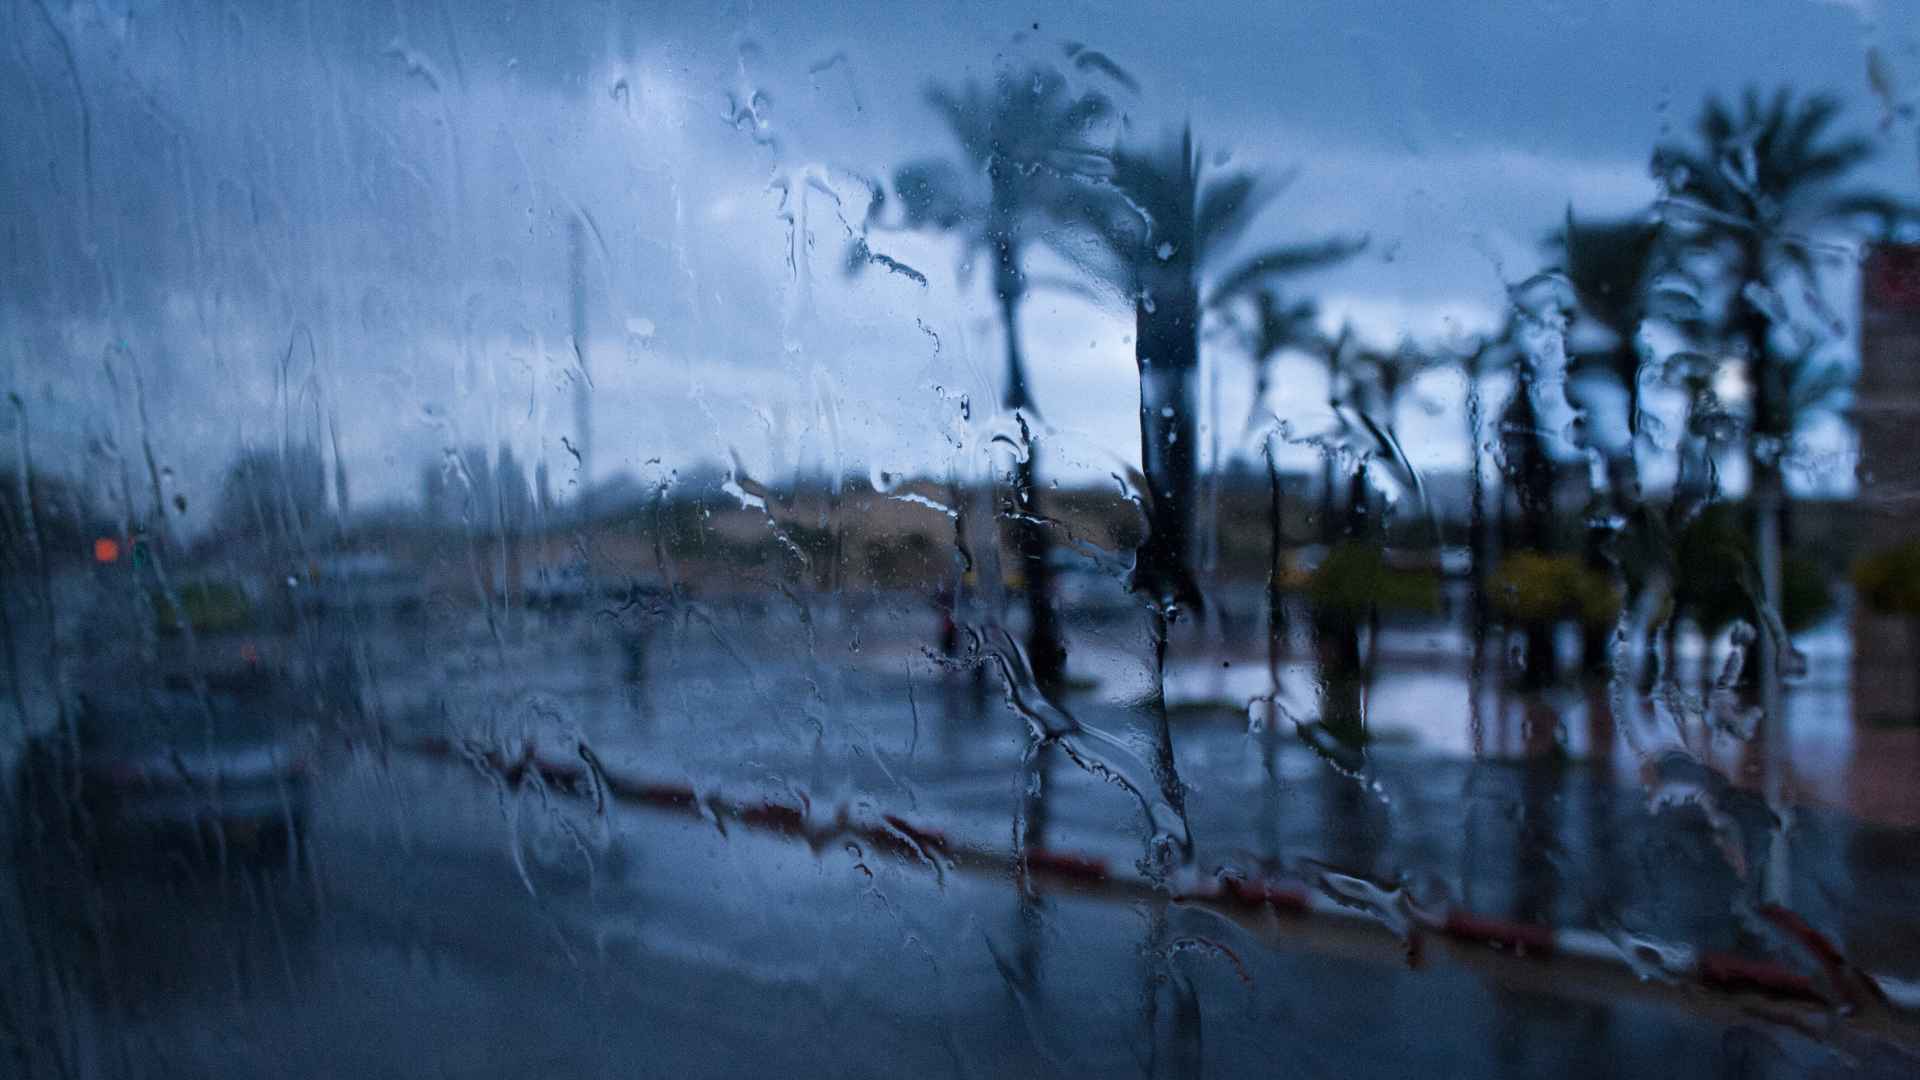 Rainy day in Israel